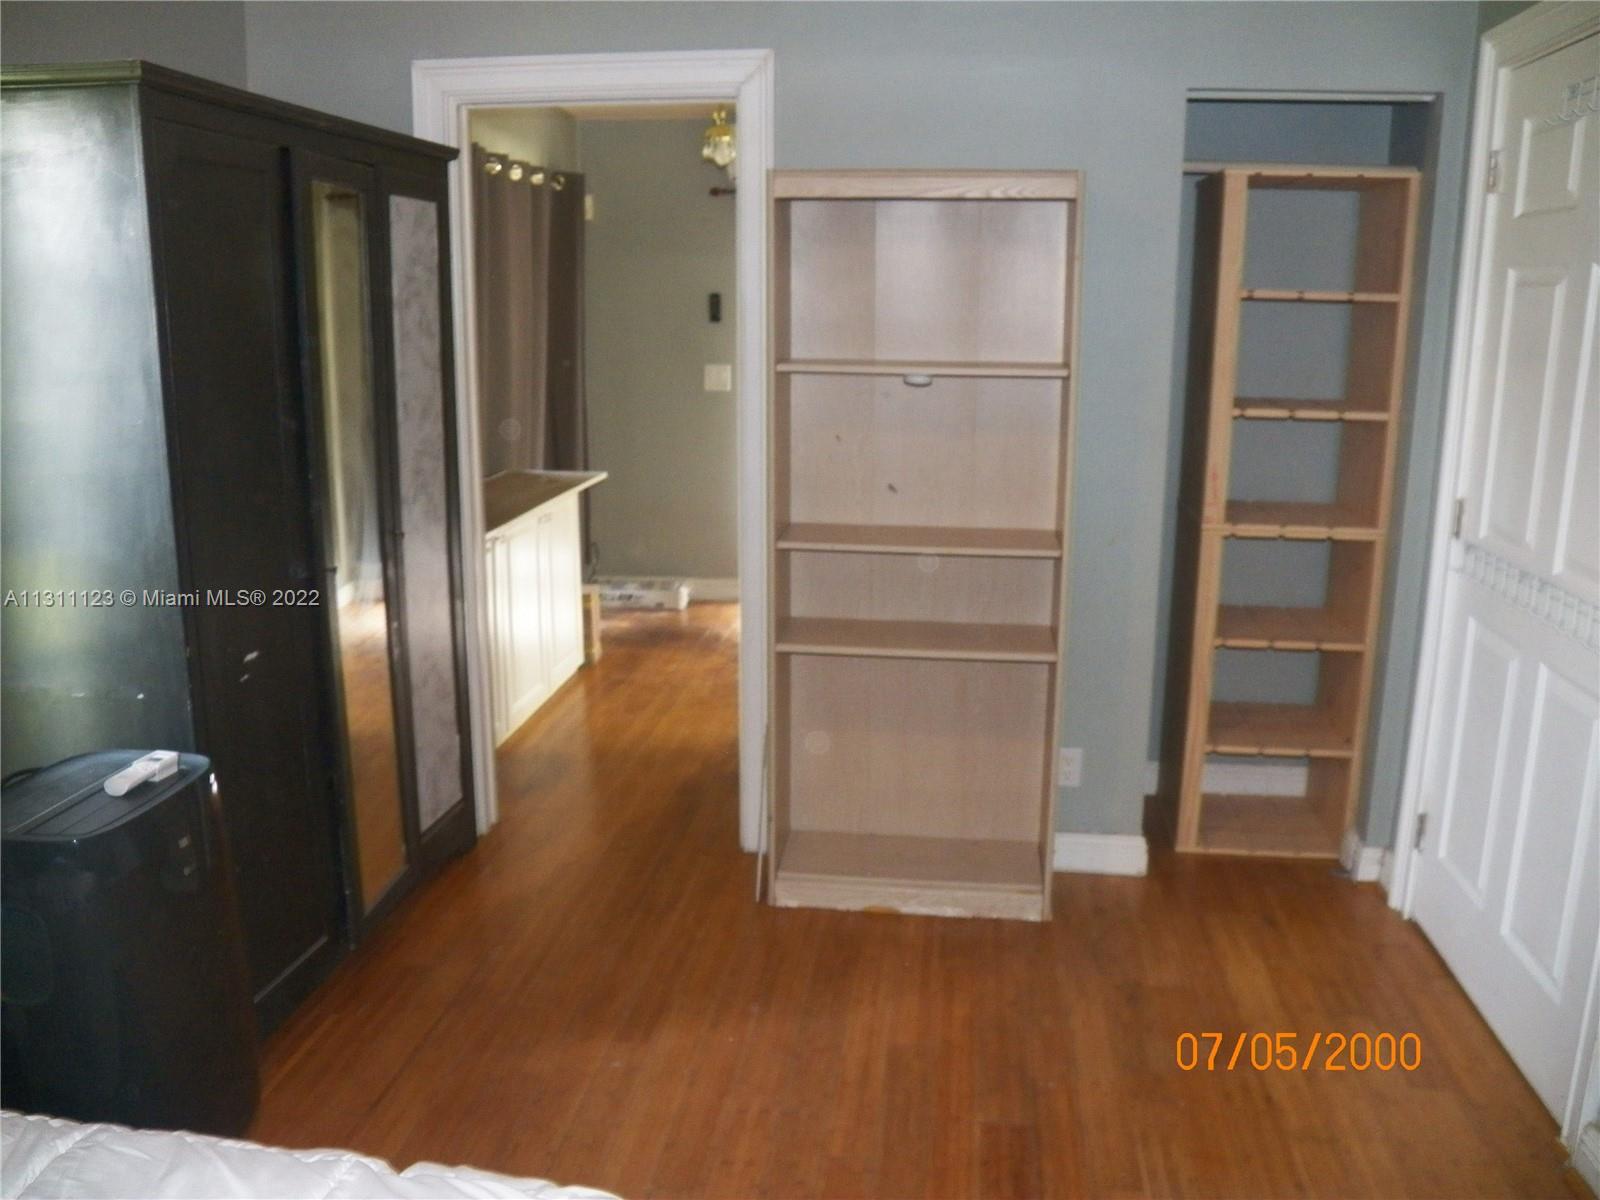 a view of walk in closet with empty racks